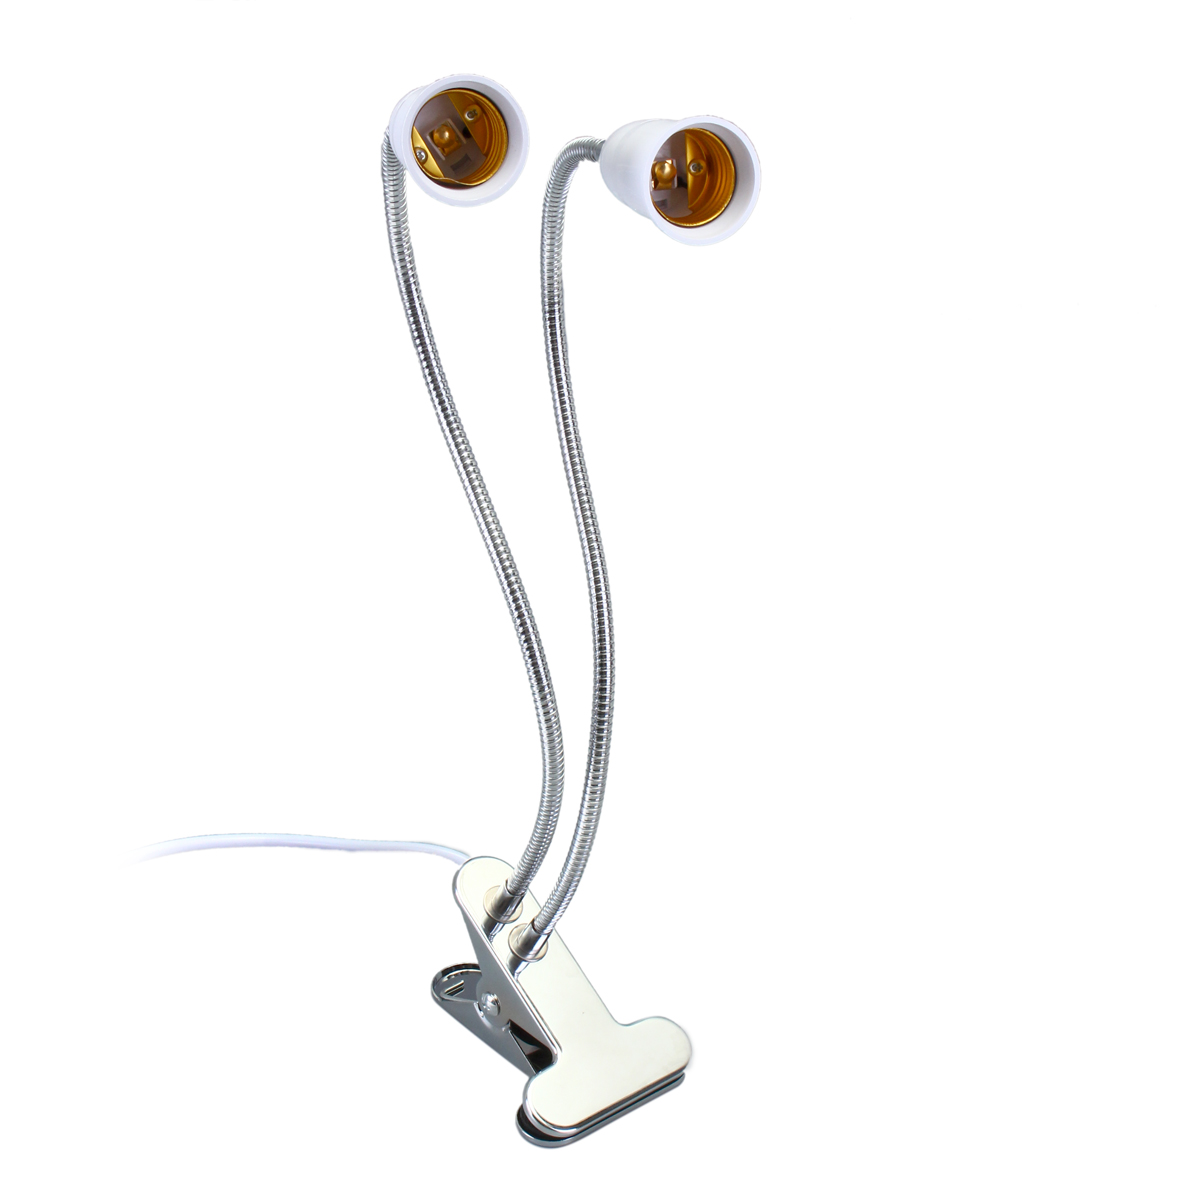 40CM E27 Flexible Dual Head Clip Lampholder Bulb Adapter with On/off Switch for LED Grow Light